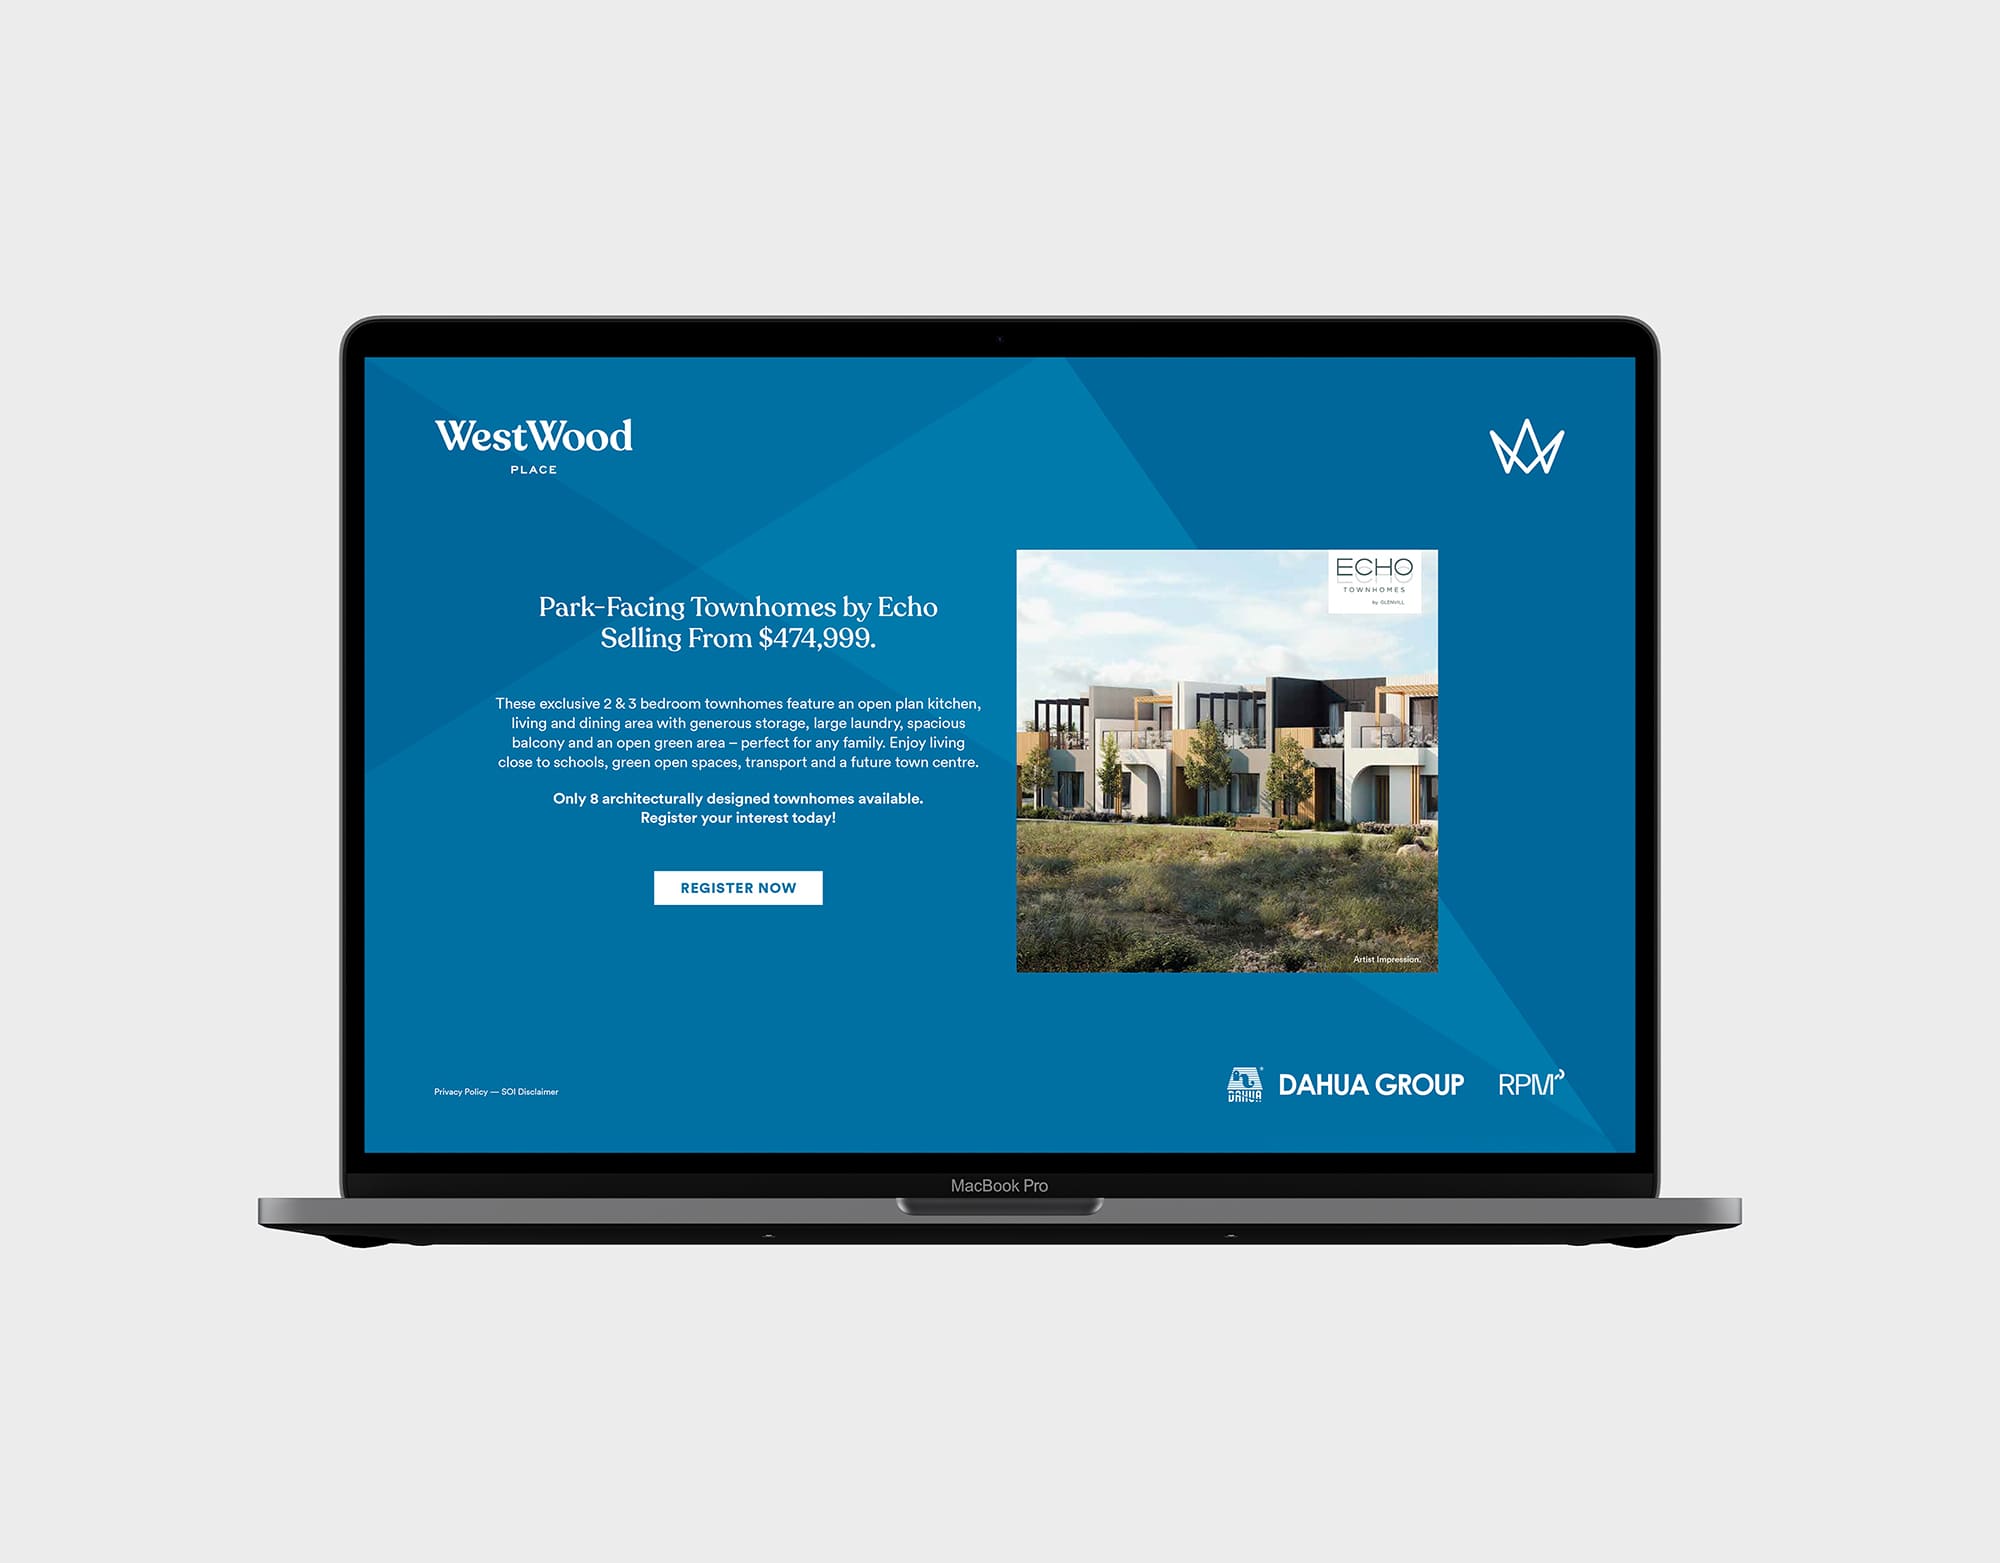 Desktop landing page for Westwood land estate - short title, paragraph and button next to an image